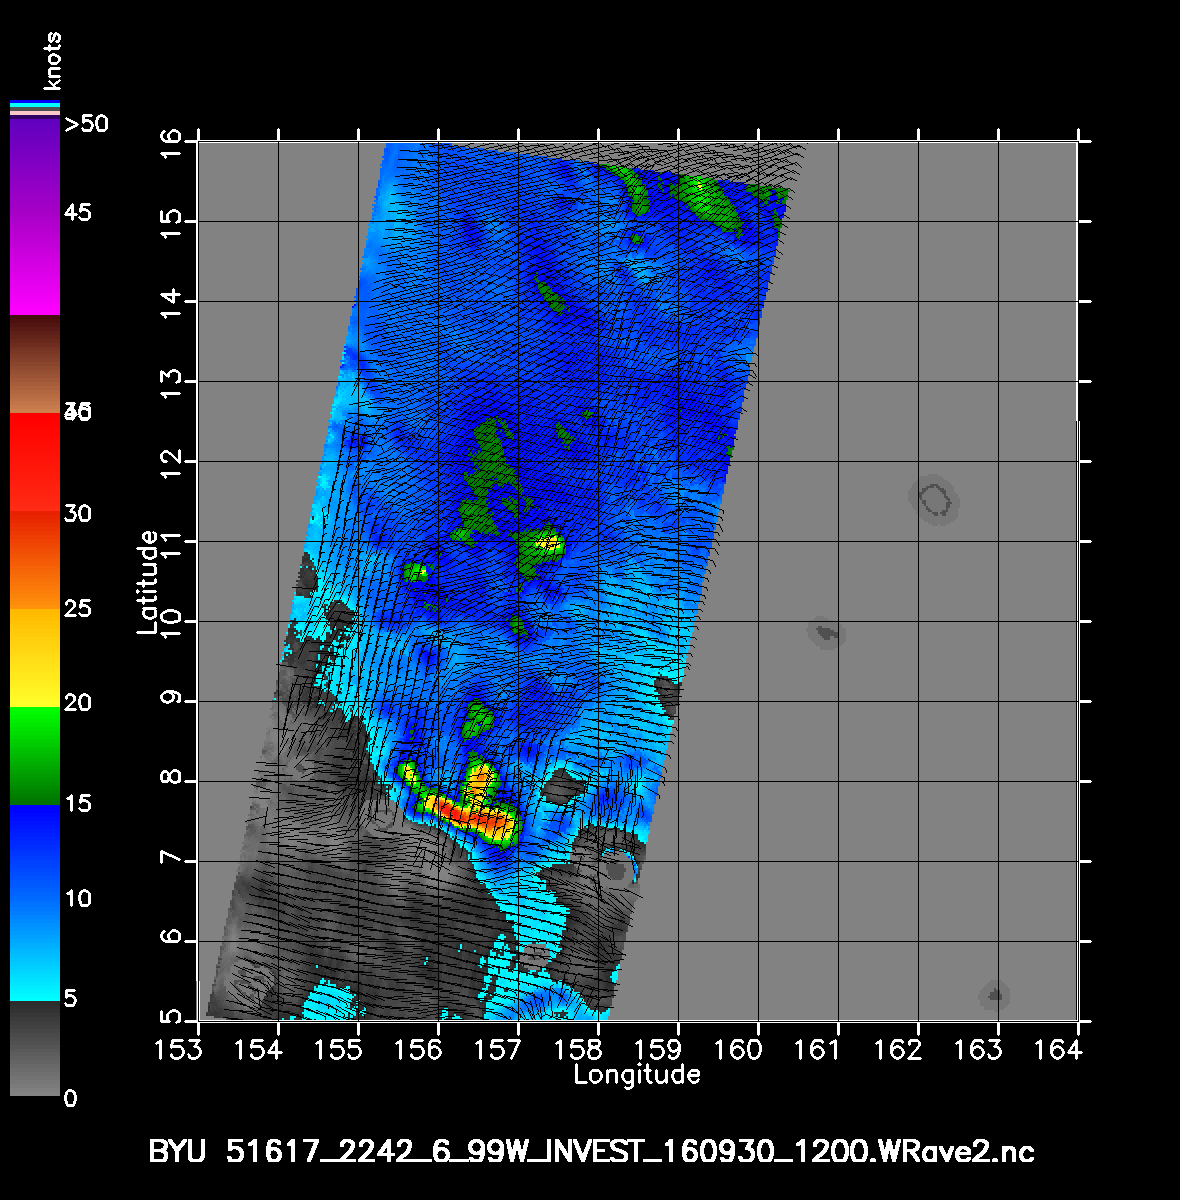 20160930.120000.ASCAT.mta.r51617.wrave2.99W.INVEST.gif